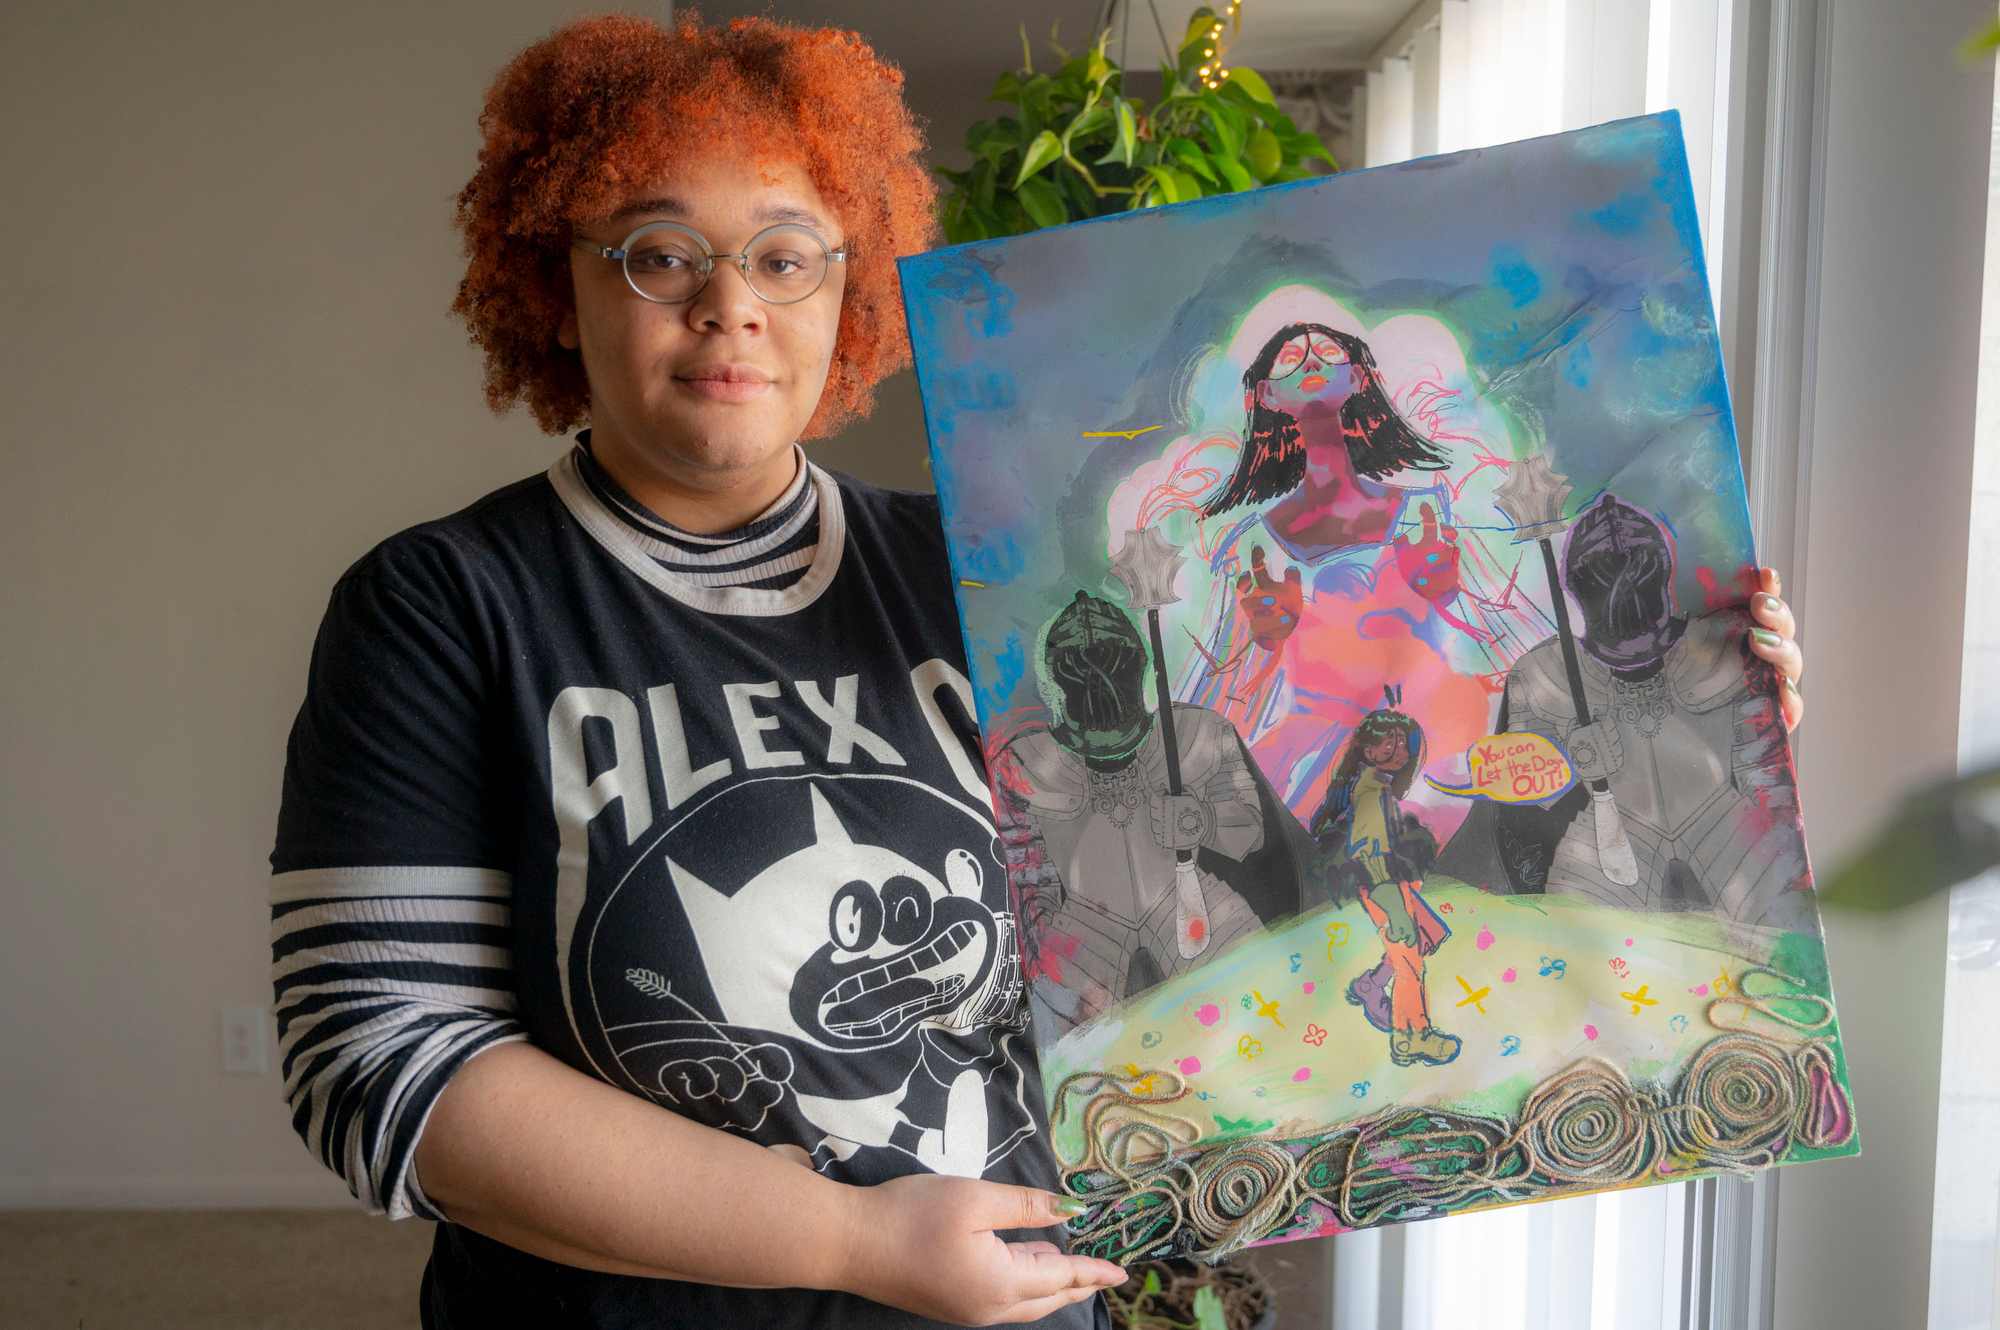 Cheyenne Fletcher poses with her mixed media artwork entitled "Forward Thinking” at her home in Ann Arbor on Wednesday, Feb. 8, 2023.
